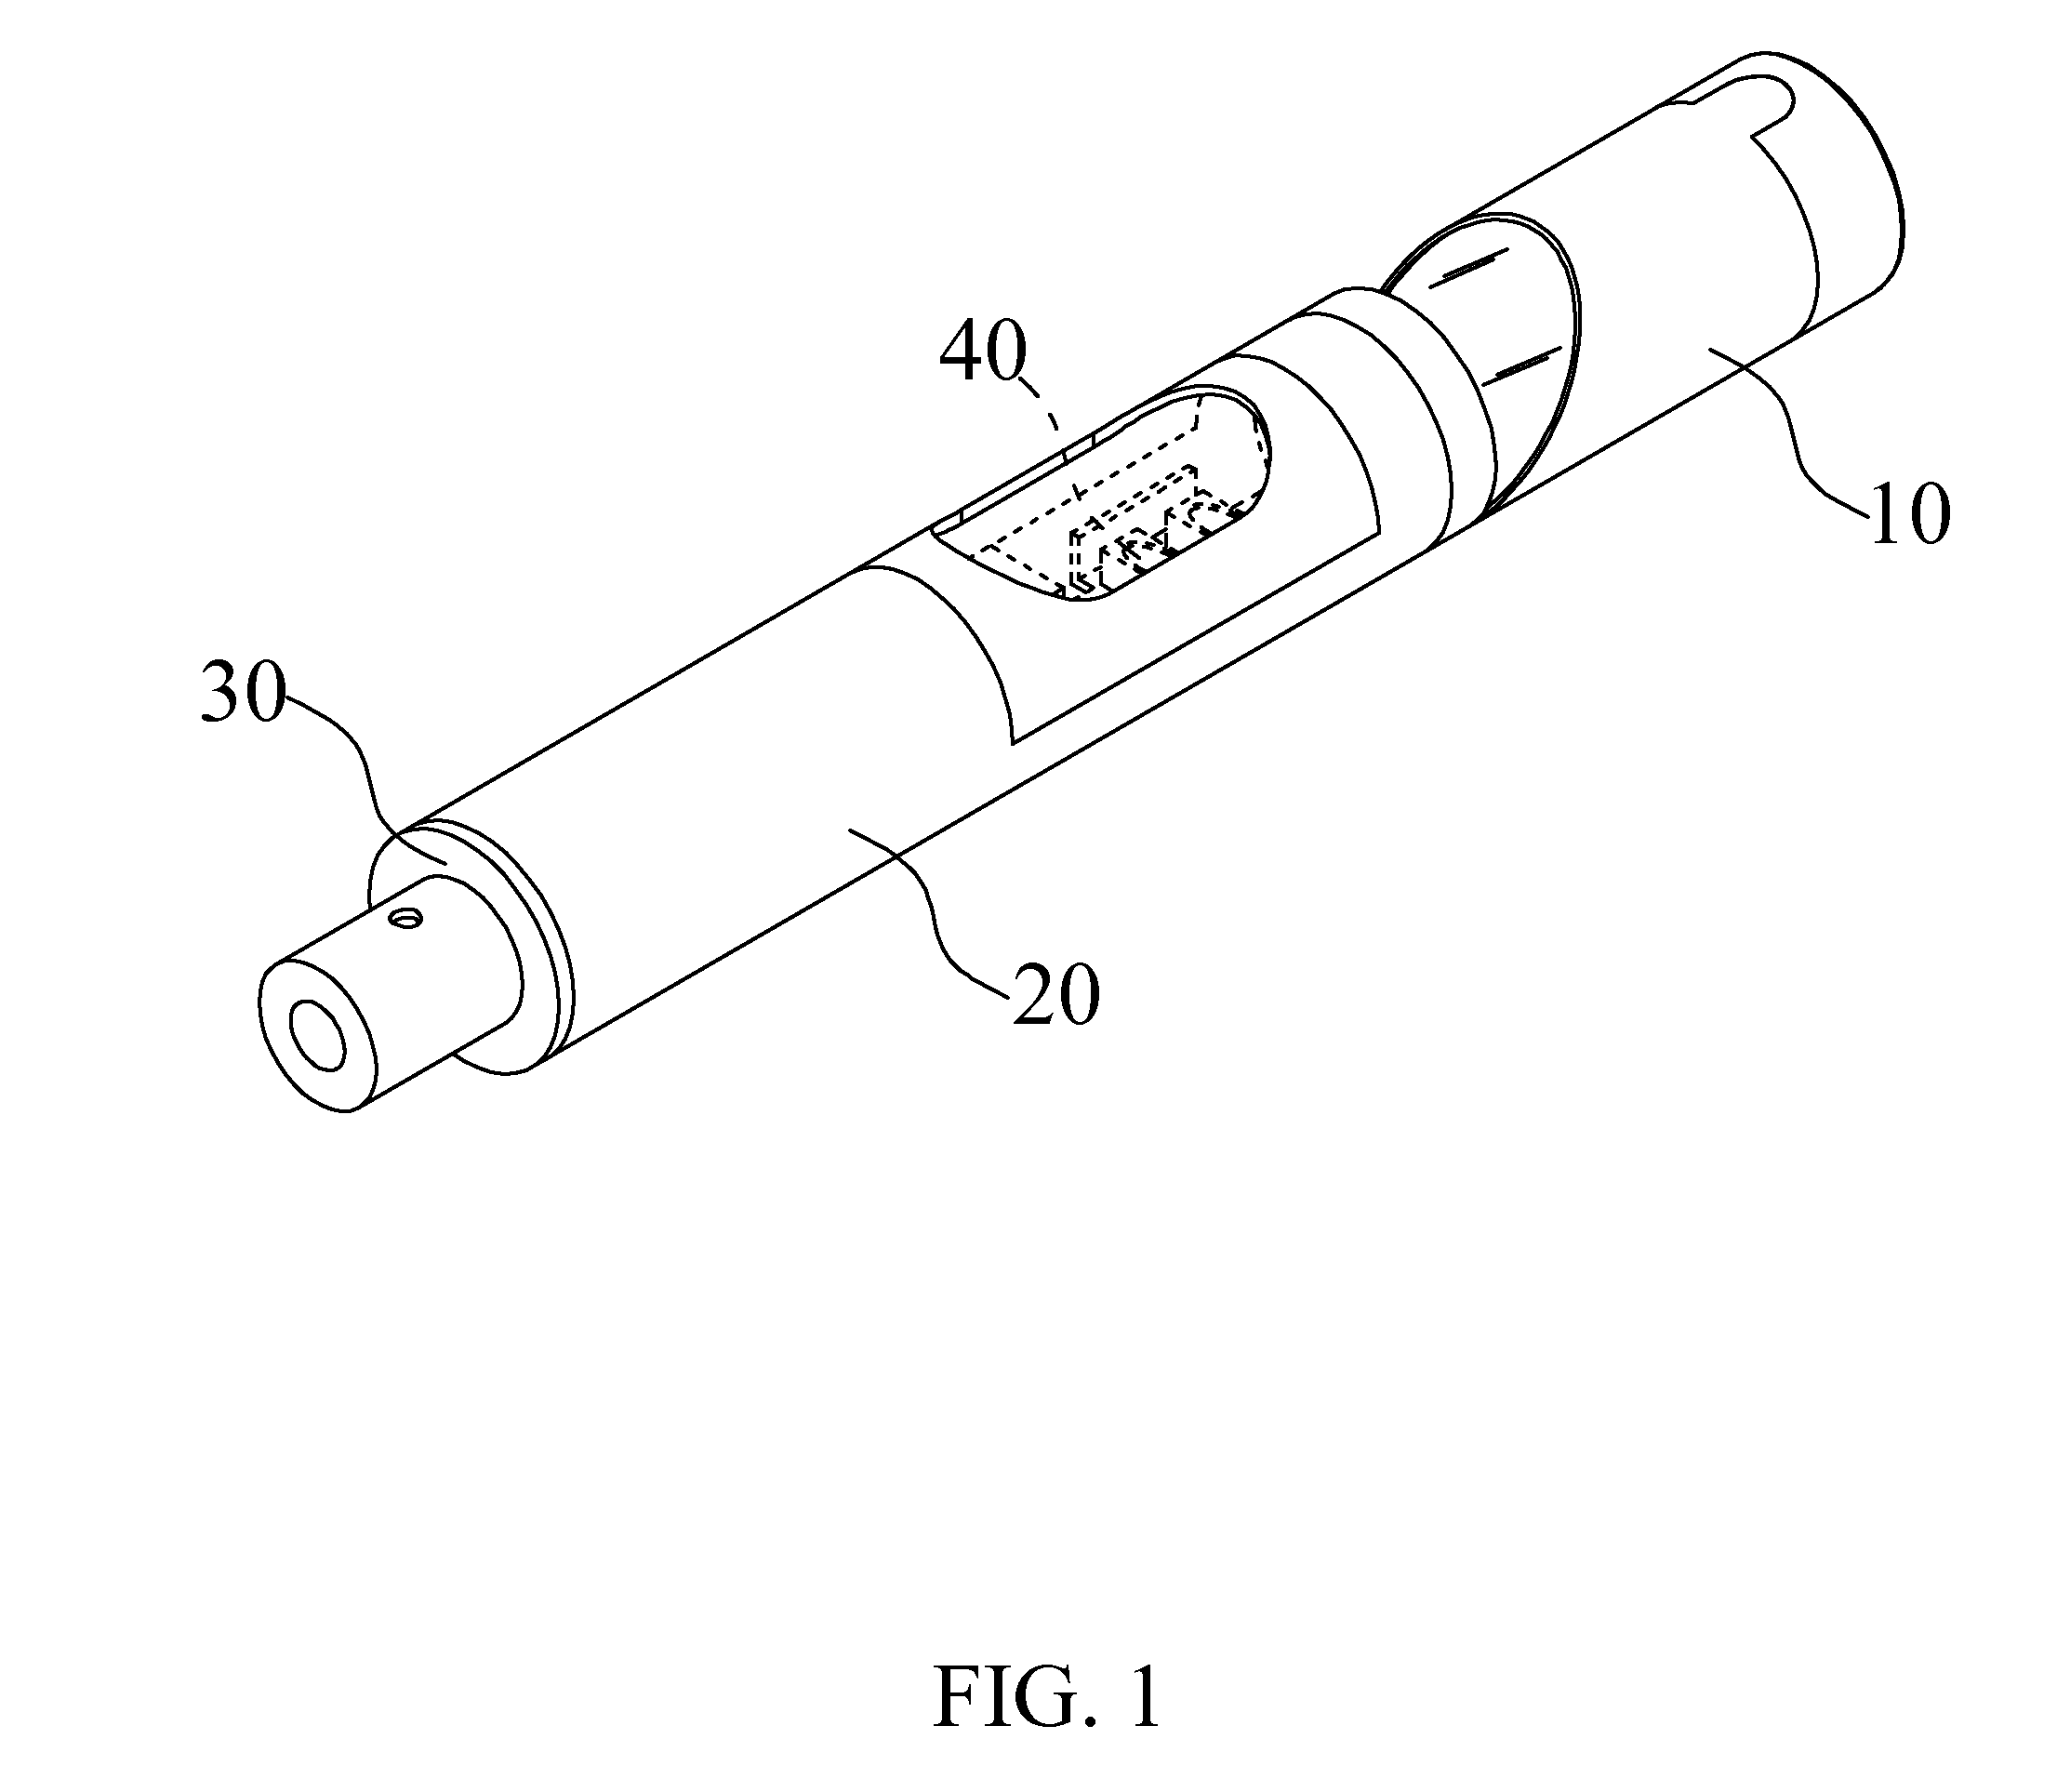 Side-viewing endoscope structure